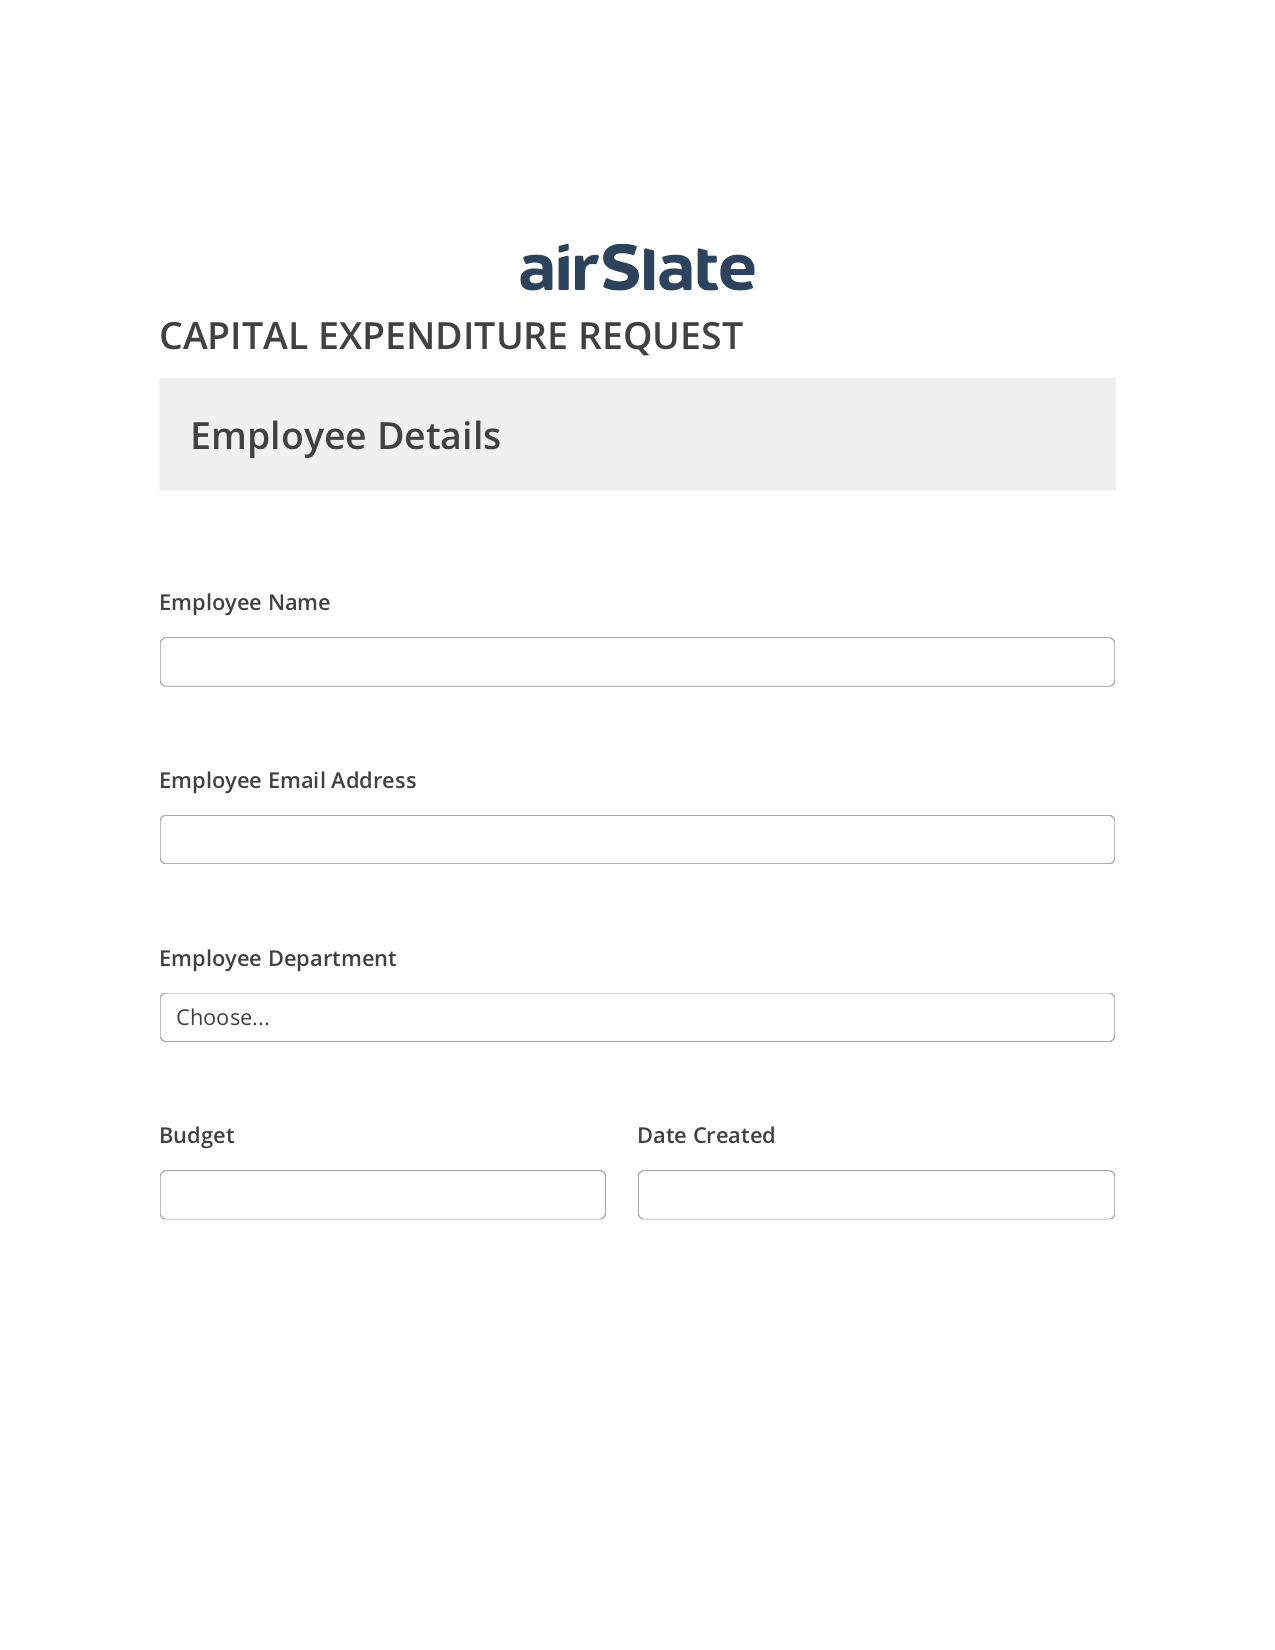 Capital Expenditure Request Approval Workflow Pre-fill from Salesforce Records with SOQL Bot, Lock the Slate Bot, Archive to SharePoint Folder